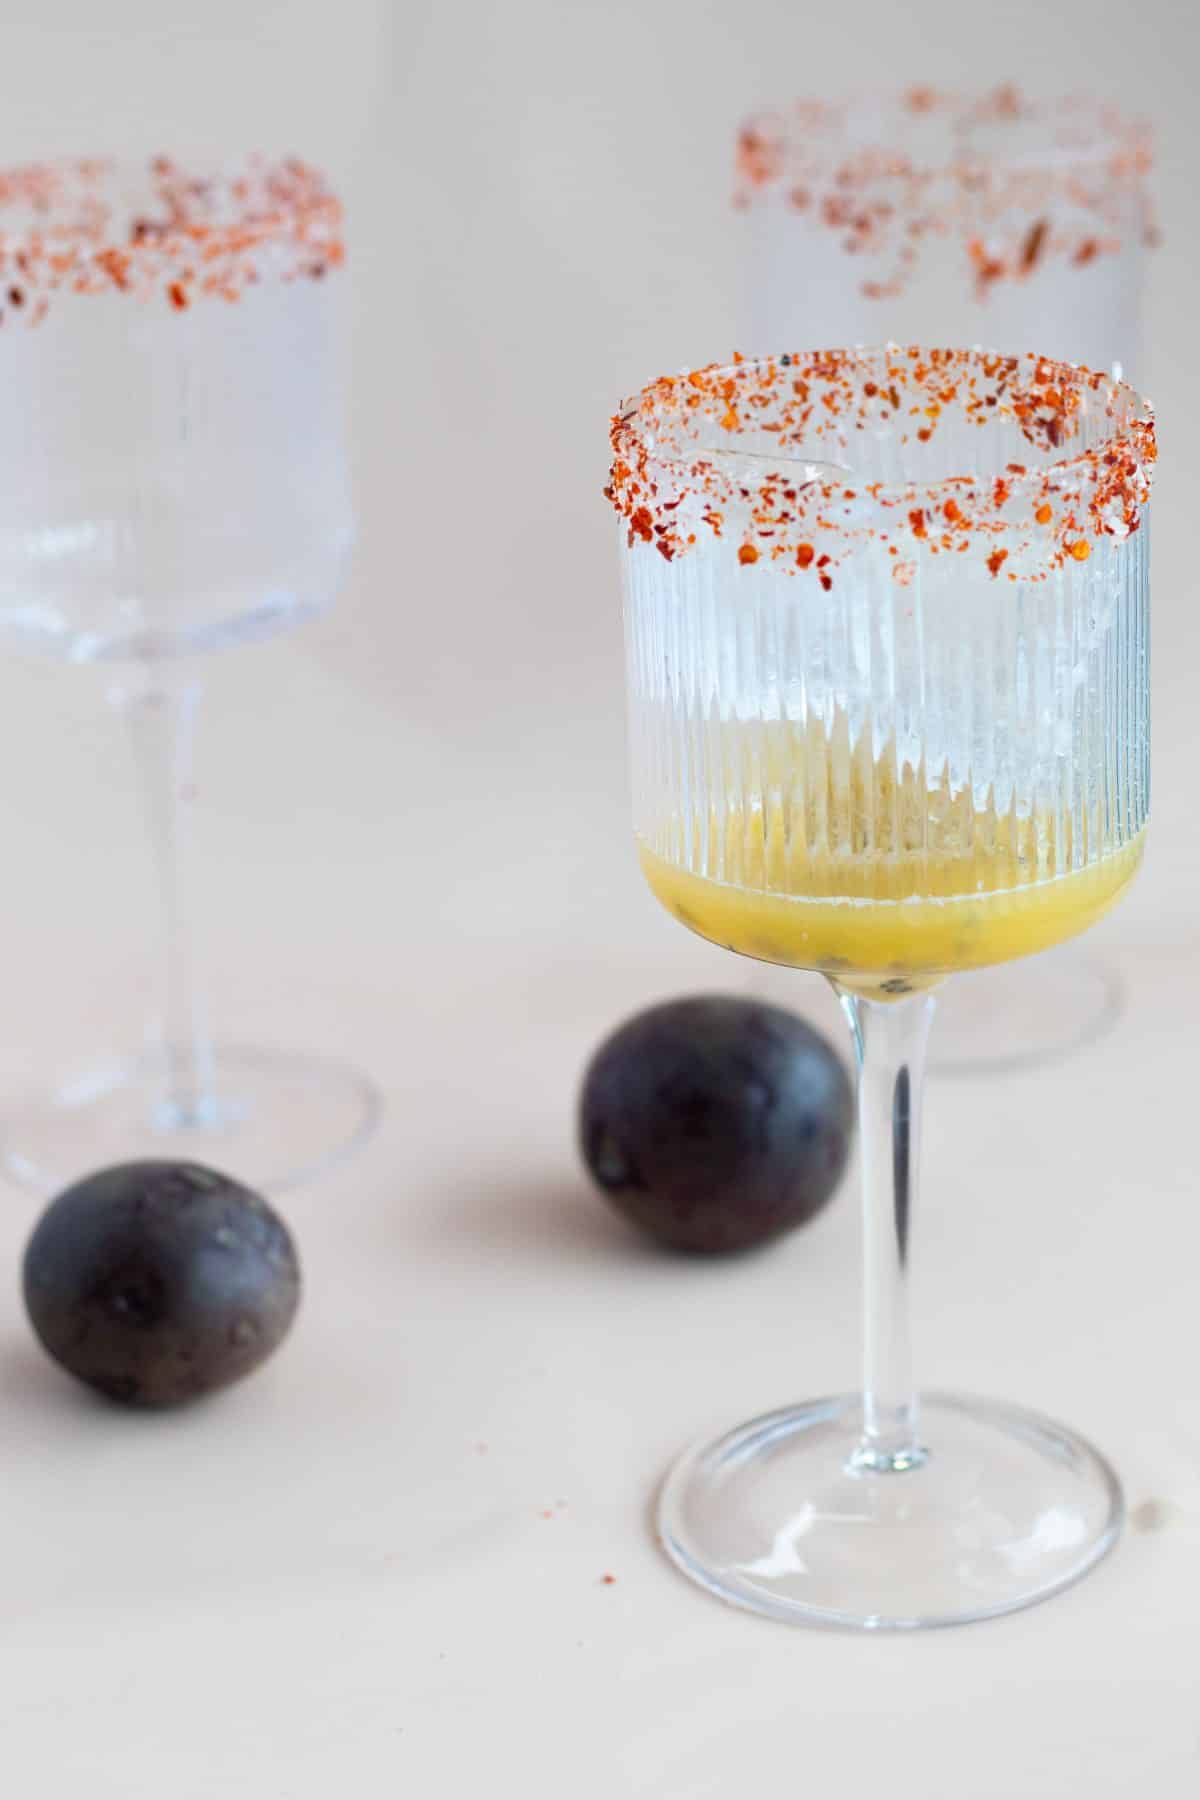 passion fruit and lime juice with ice cubes in a glass rimmed with sea salt and chili flakes